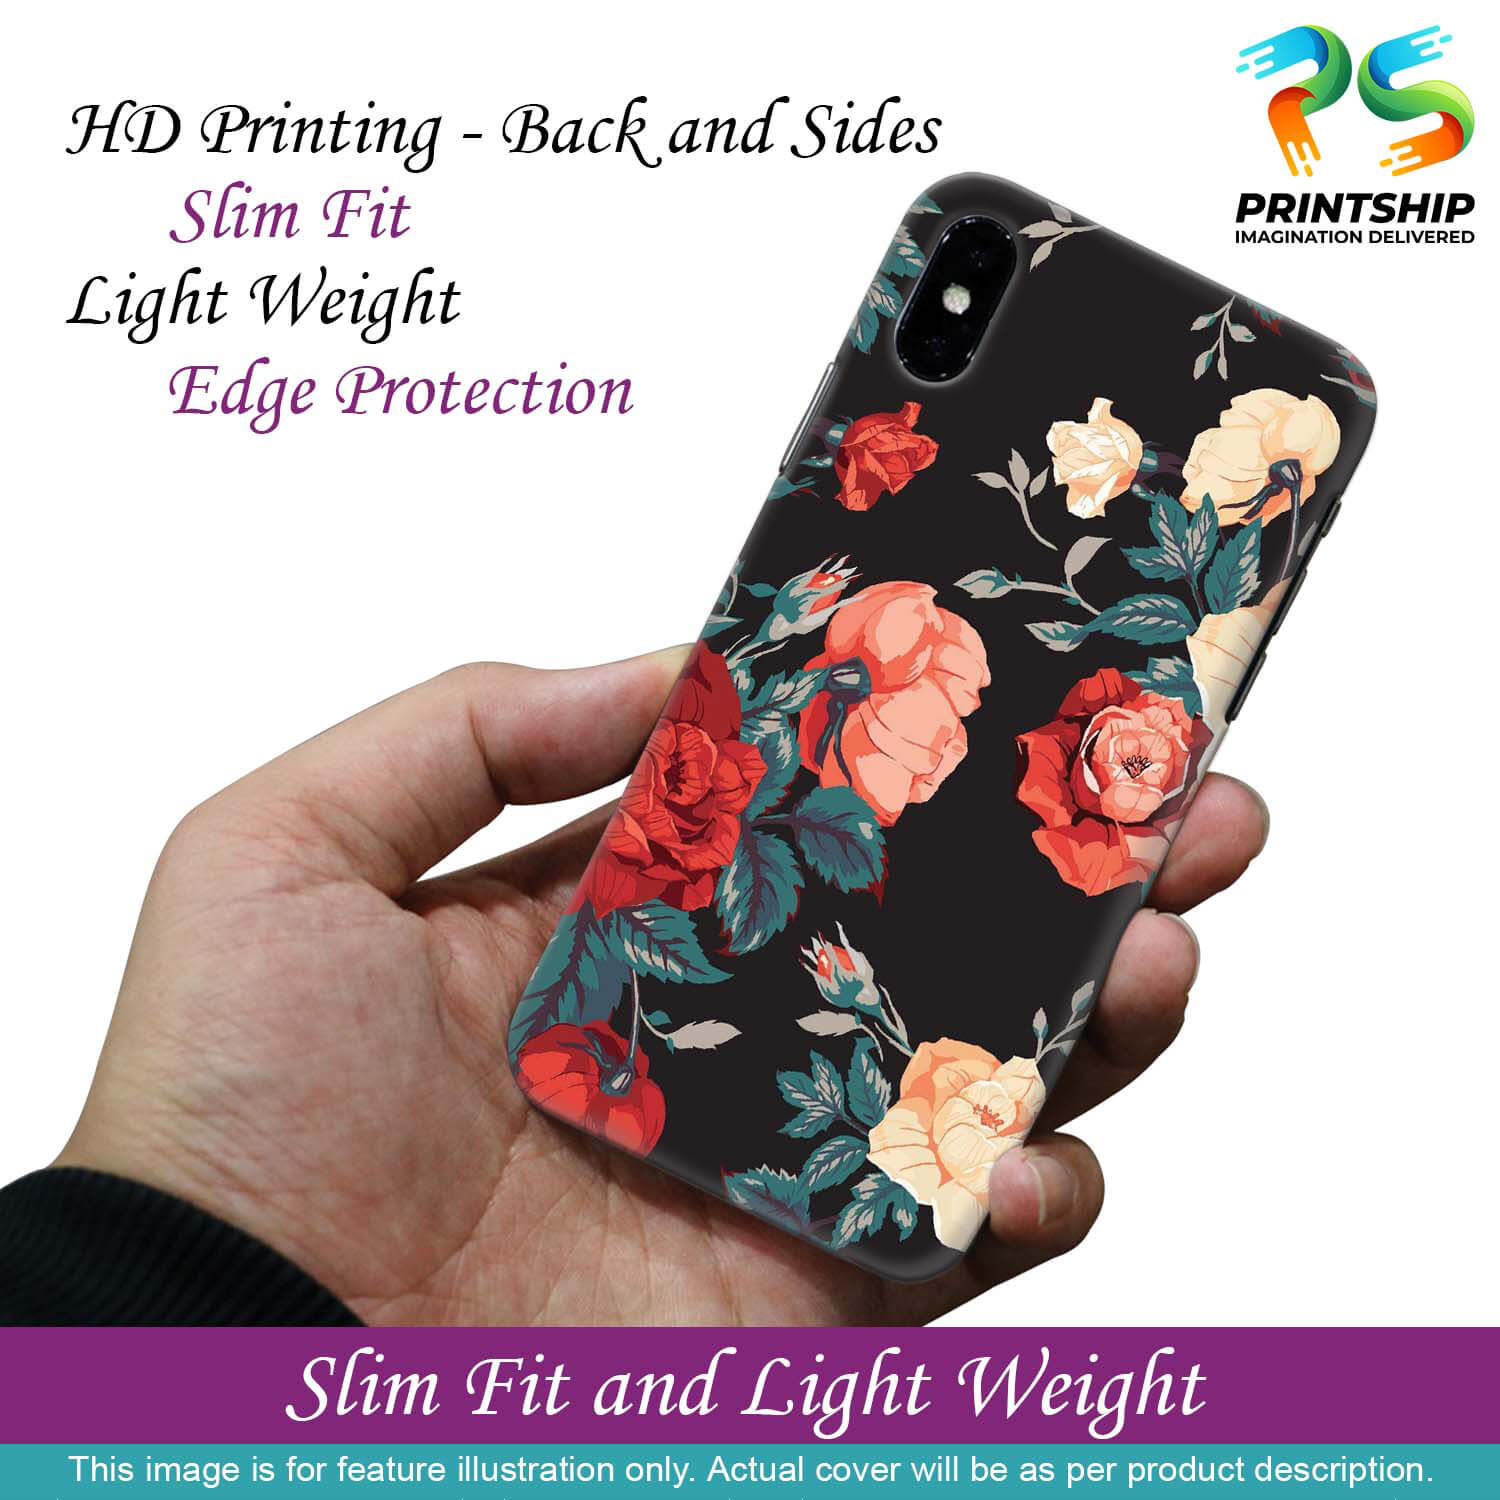 PS1340-Premium Flowers Back Cover for Samsung Galaxy C7 Pro